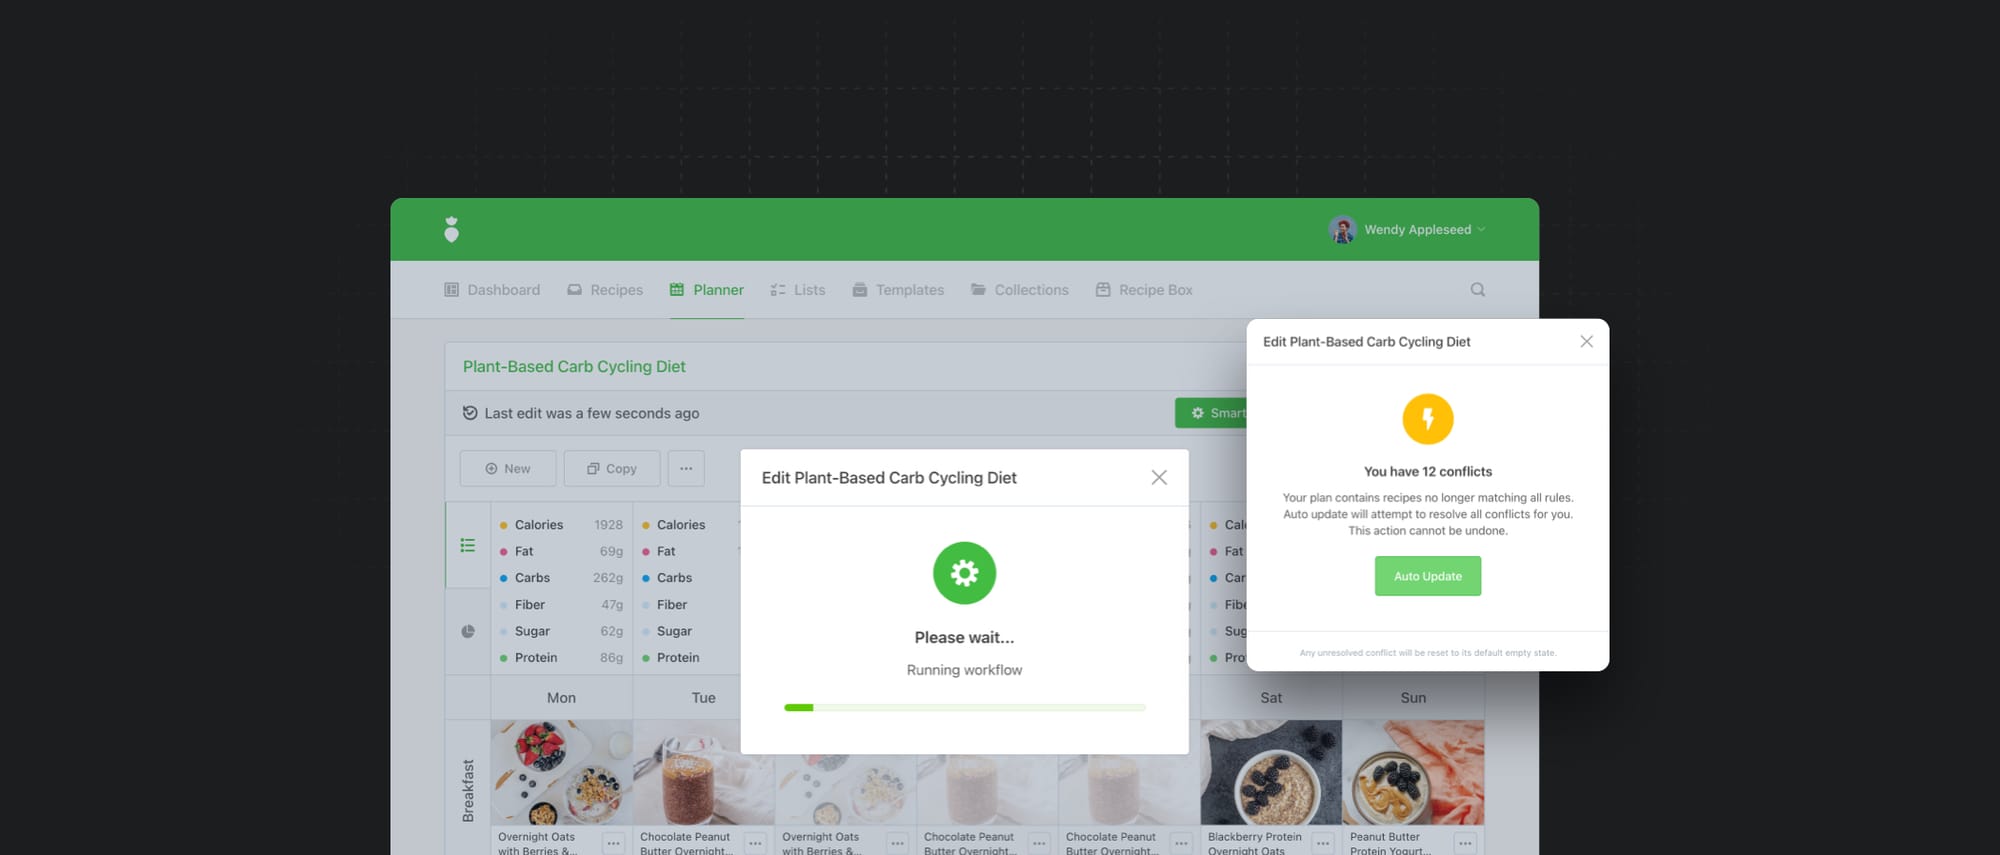 Introducing Auto Update: Optimize Your Clients’ Nutrition Plans in Seconds